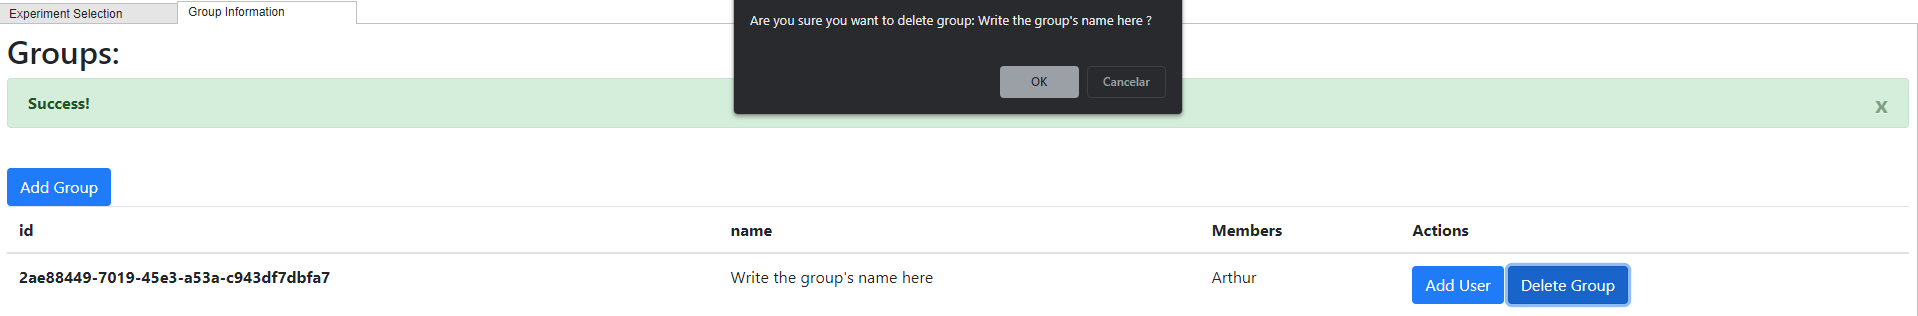 Collab delete group